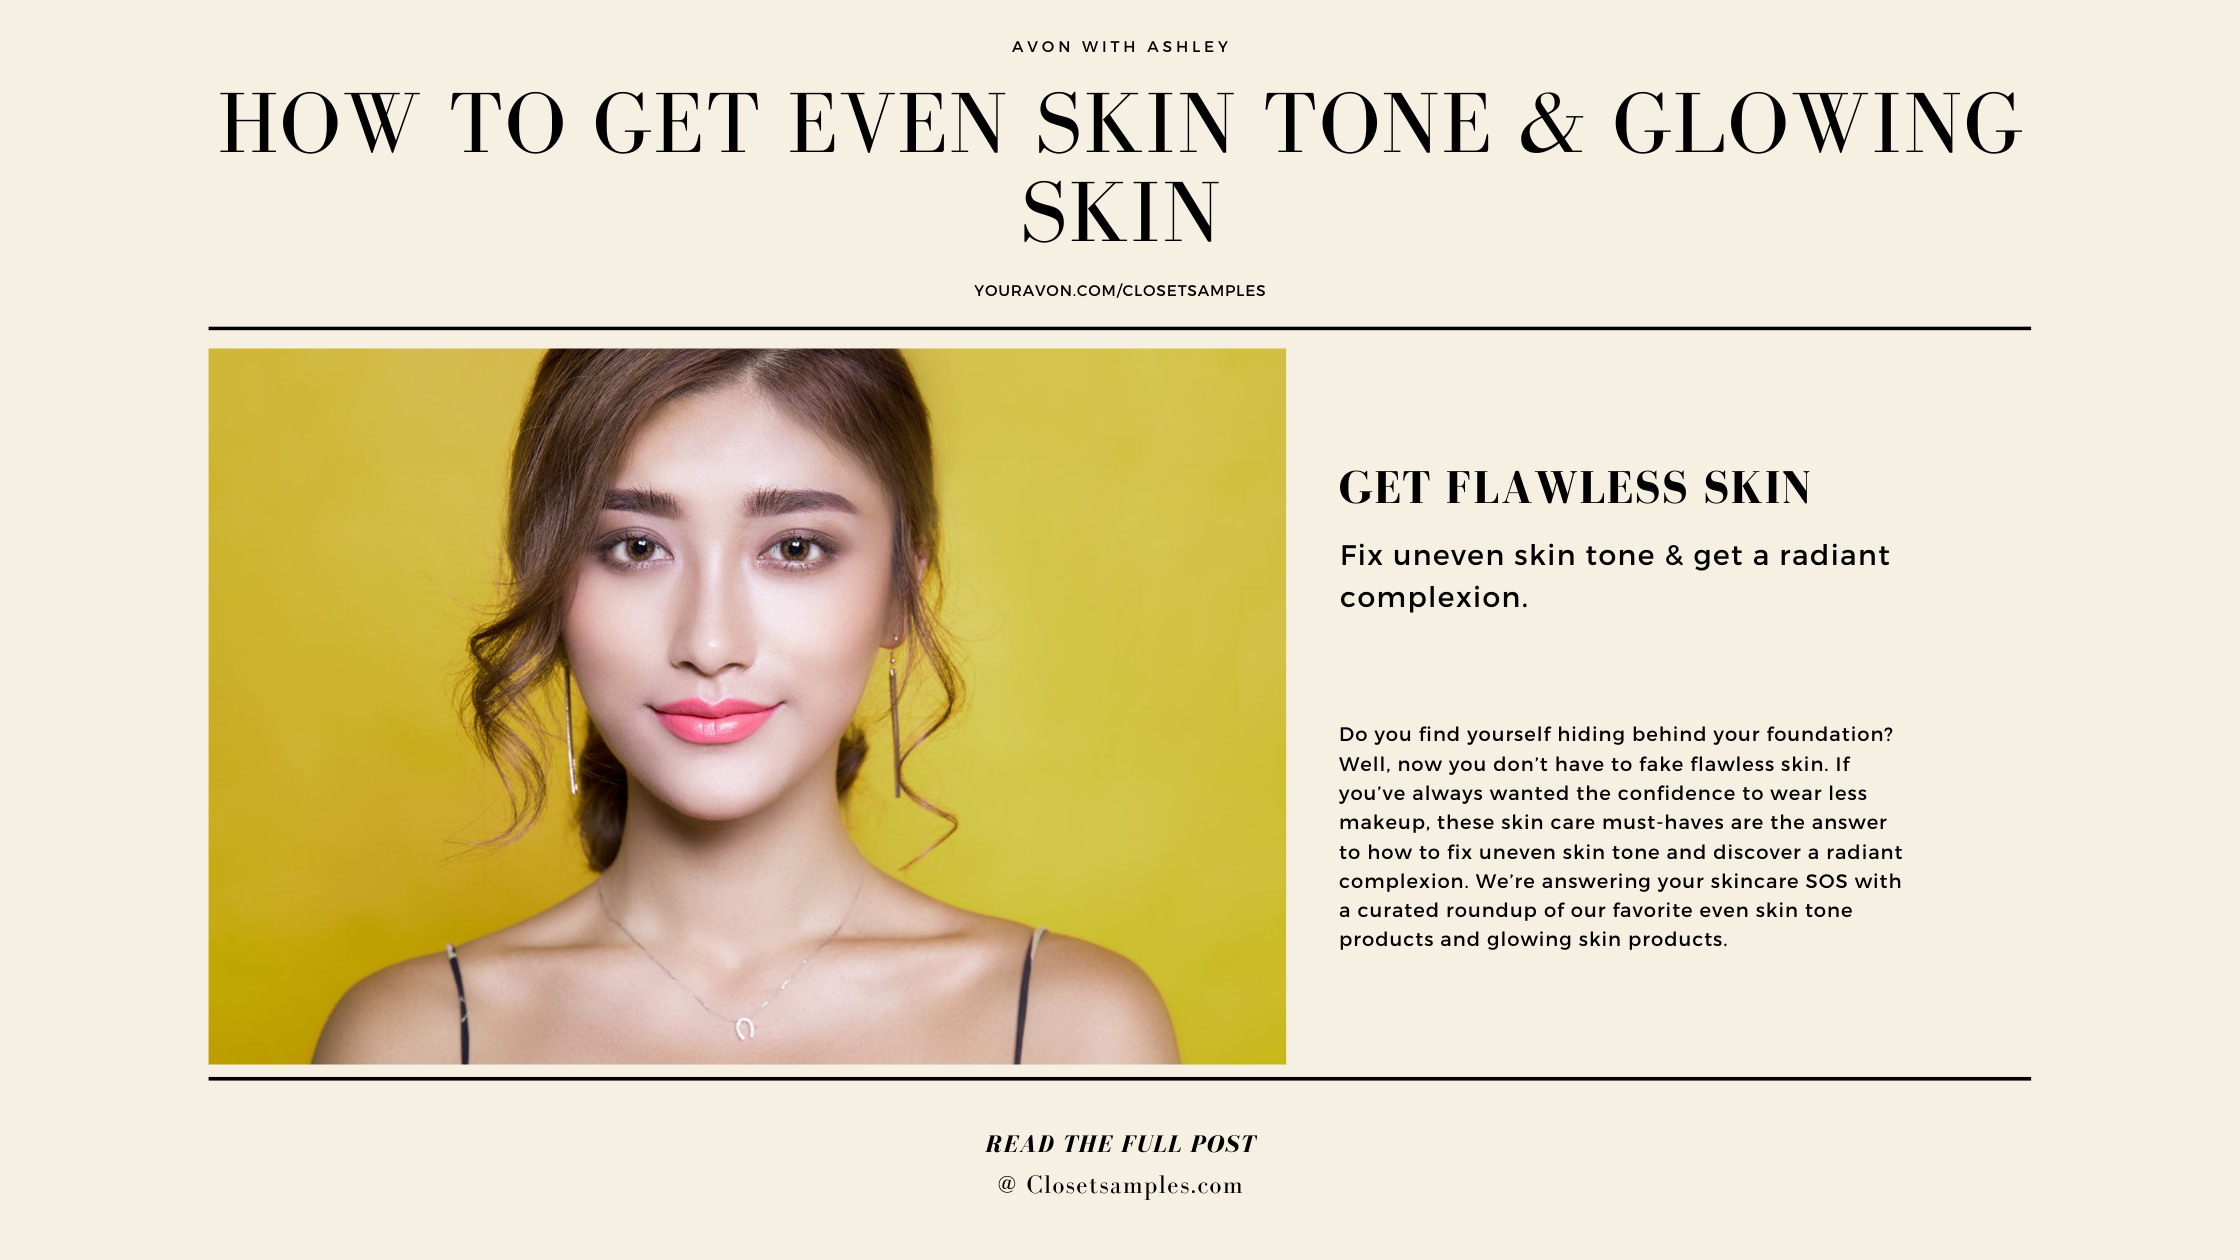 How-To-Get-Even-Skin-Tone-Glowing-Skin-Avon-Closetsamples.png